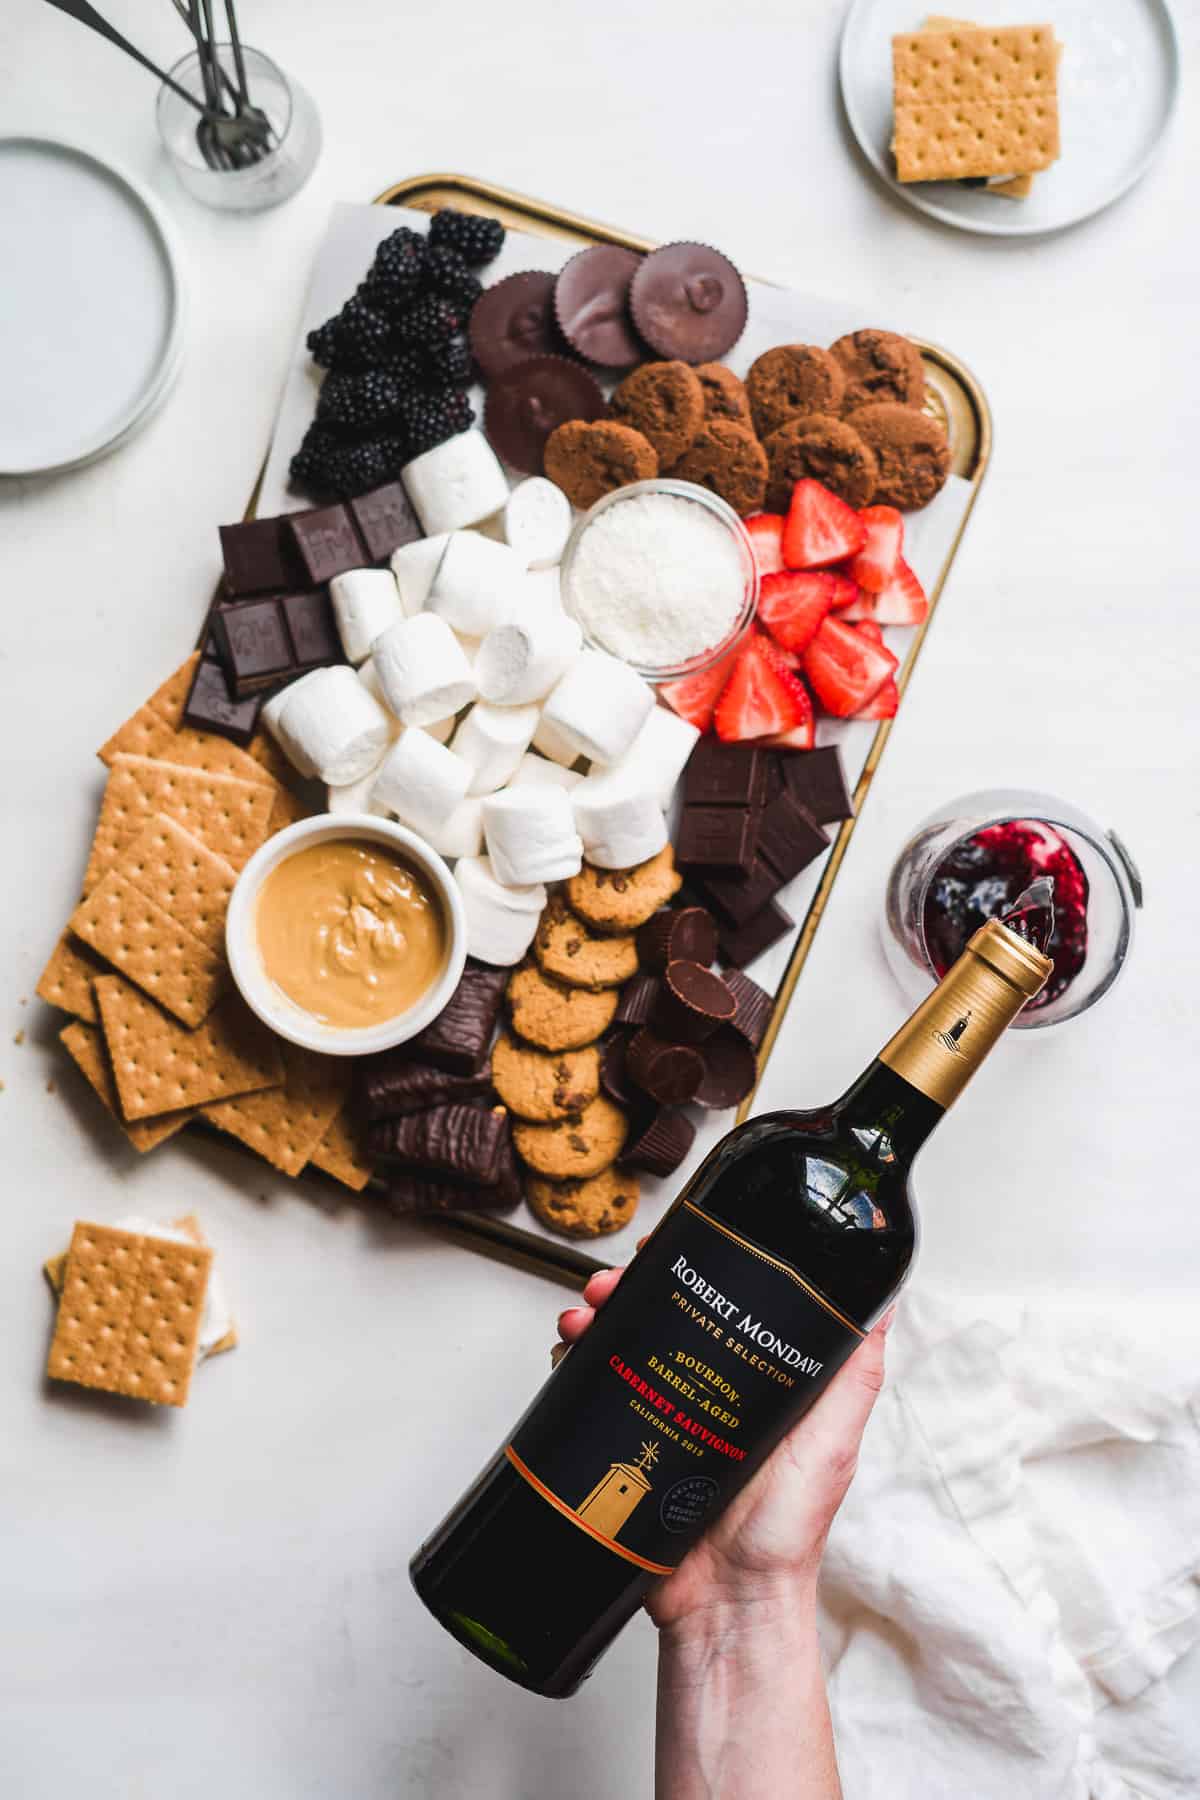 Hand pouring red wine into wine glass with a dessert board to the side.